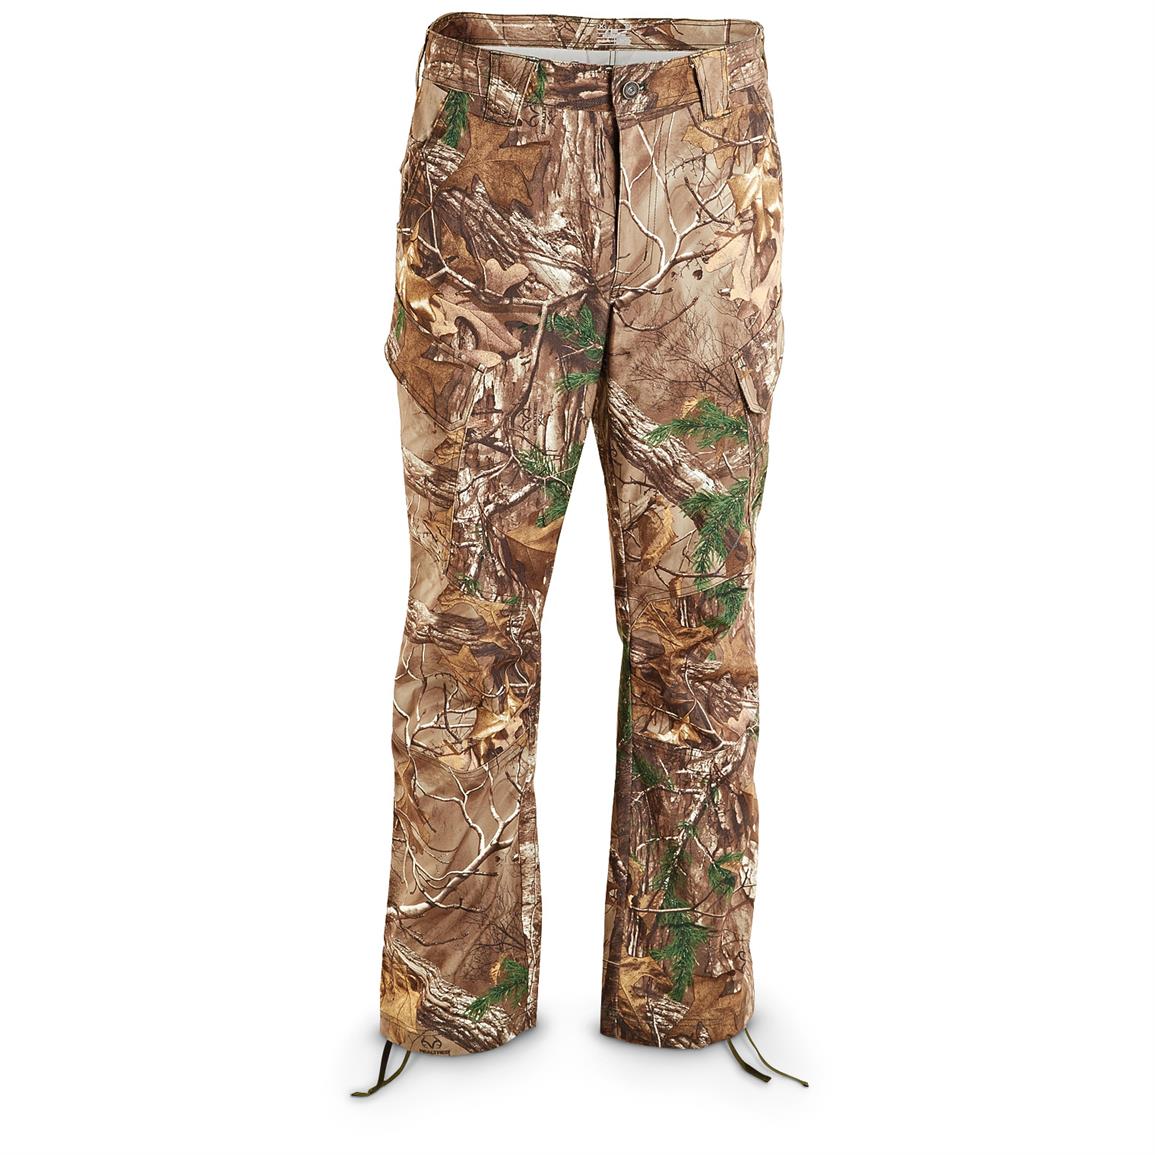 under armour upland pants